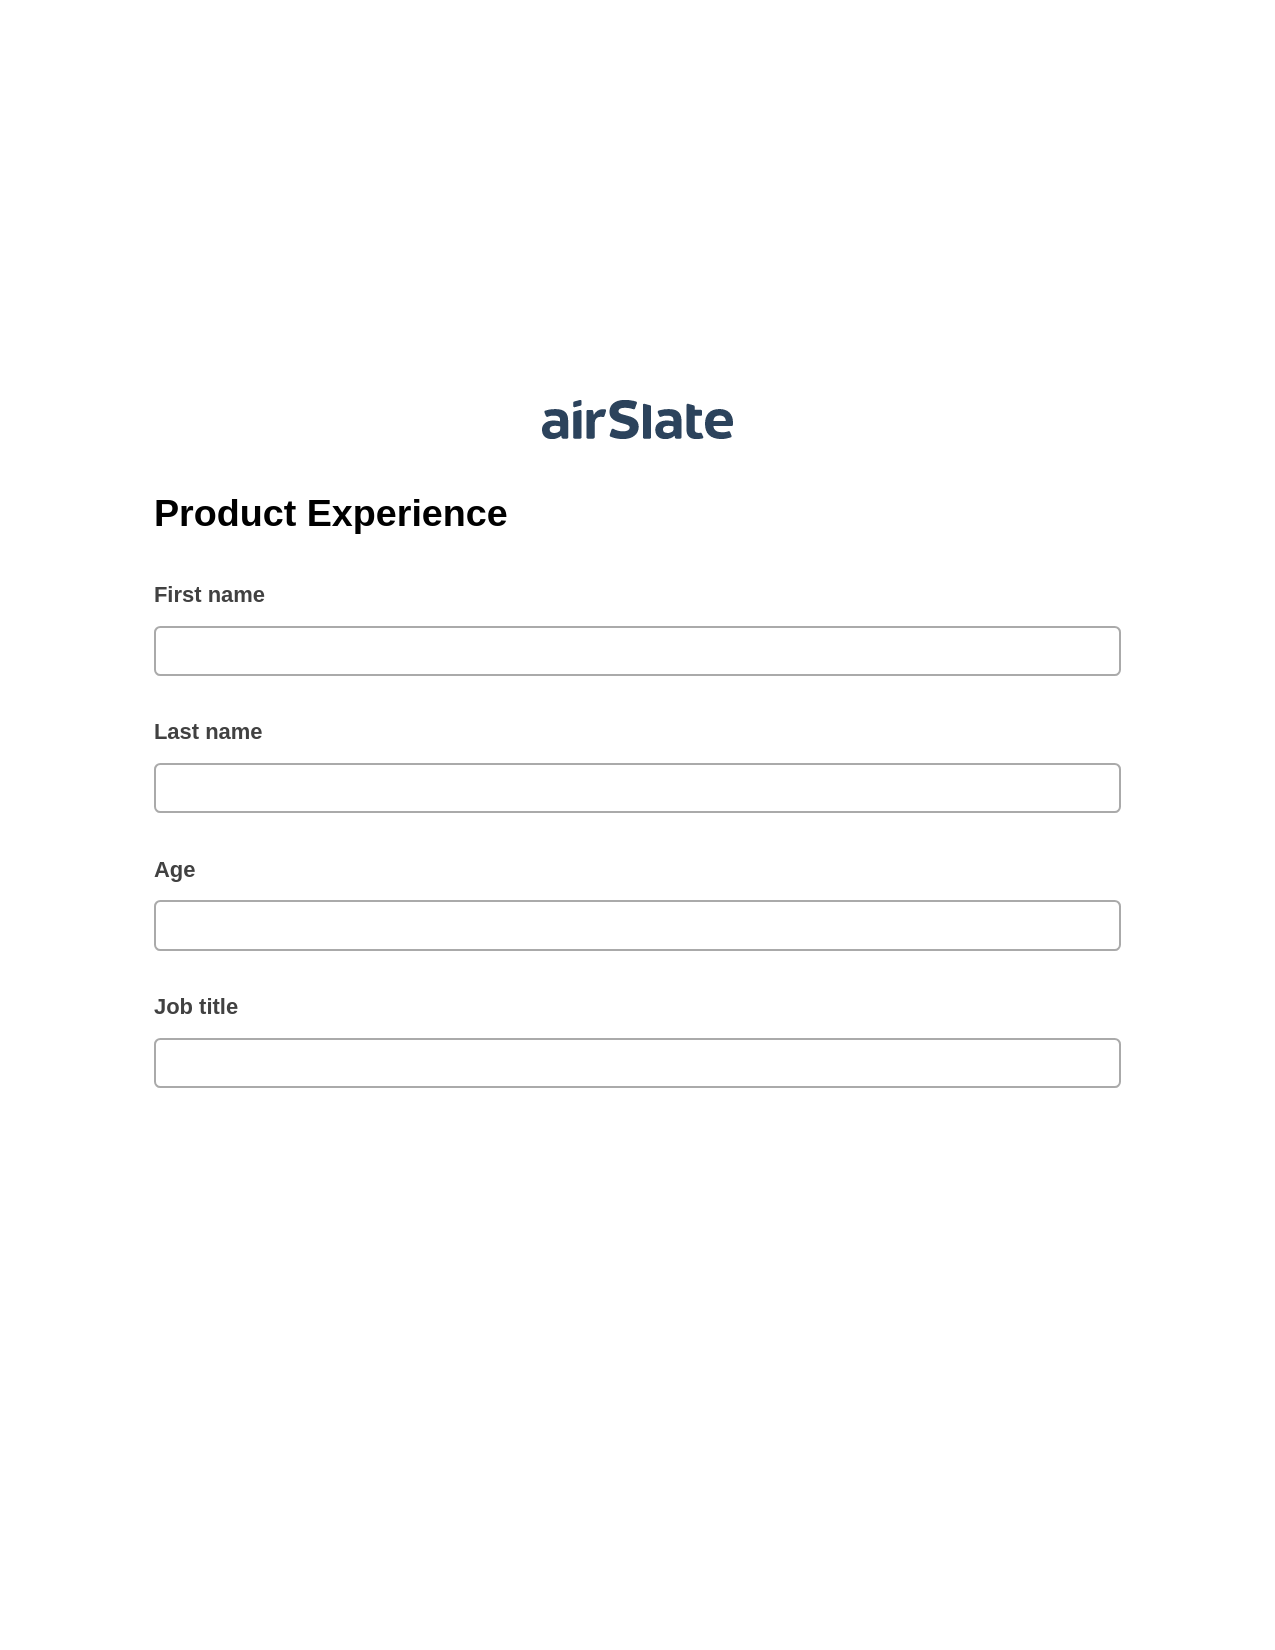 Product Experience Pre-fill from Salesforce Records Bot, Unassign Role Bot, Slack Notification Postfinish Bot